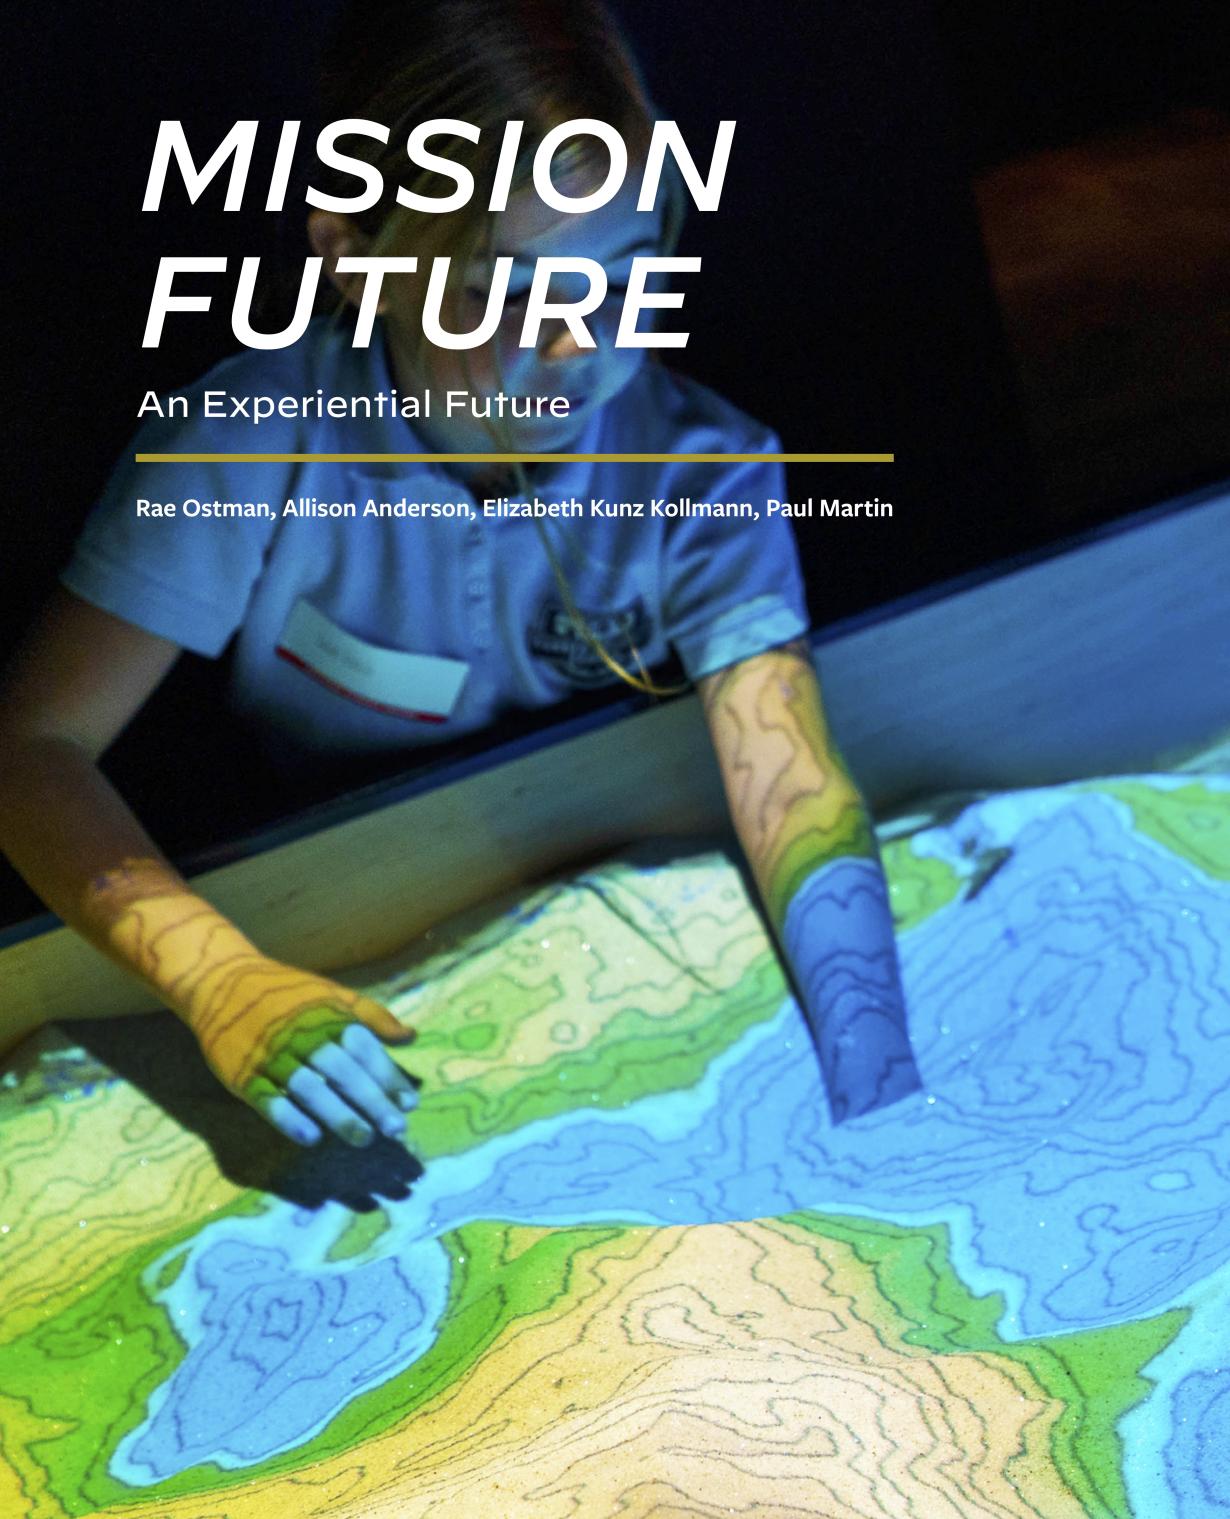 Mission Future article in the journal Exhibition cover page